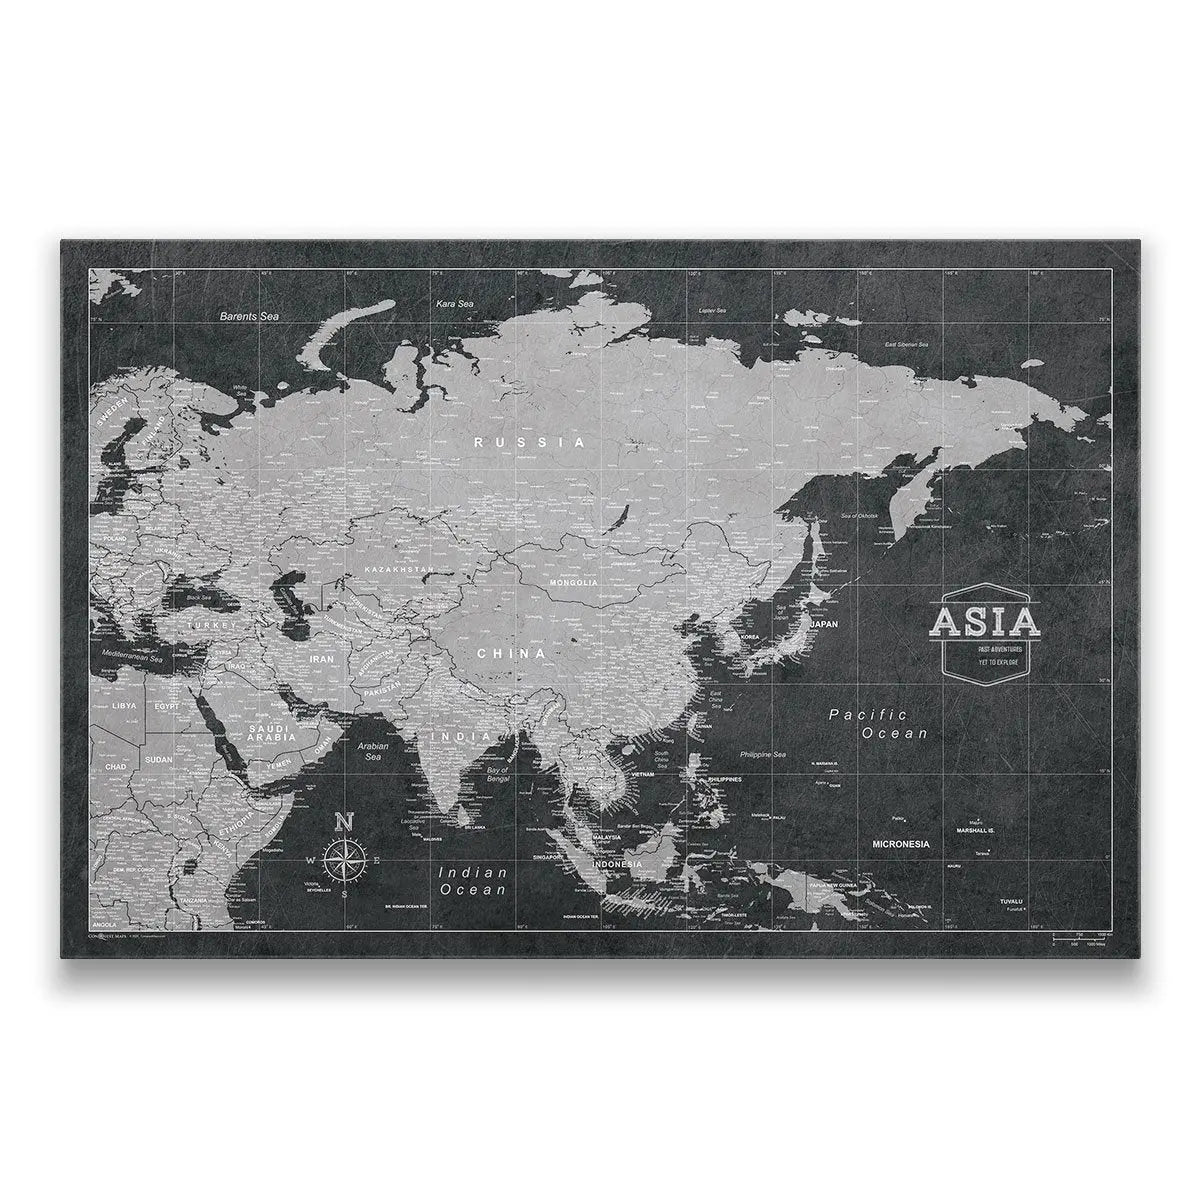 Asia Wall Maps: Track Your Travels in Style